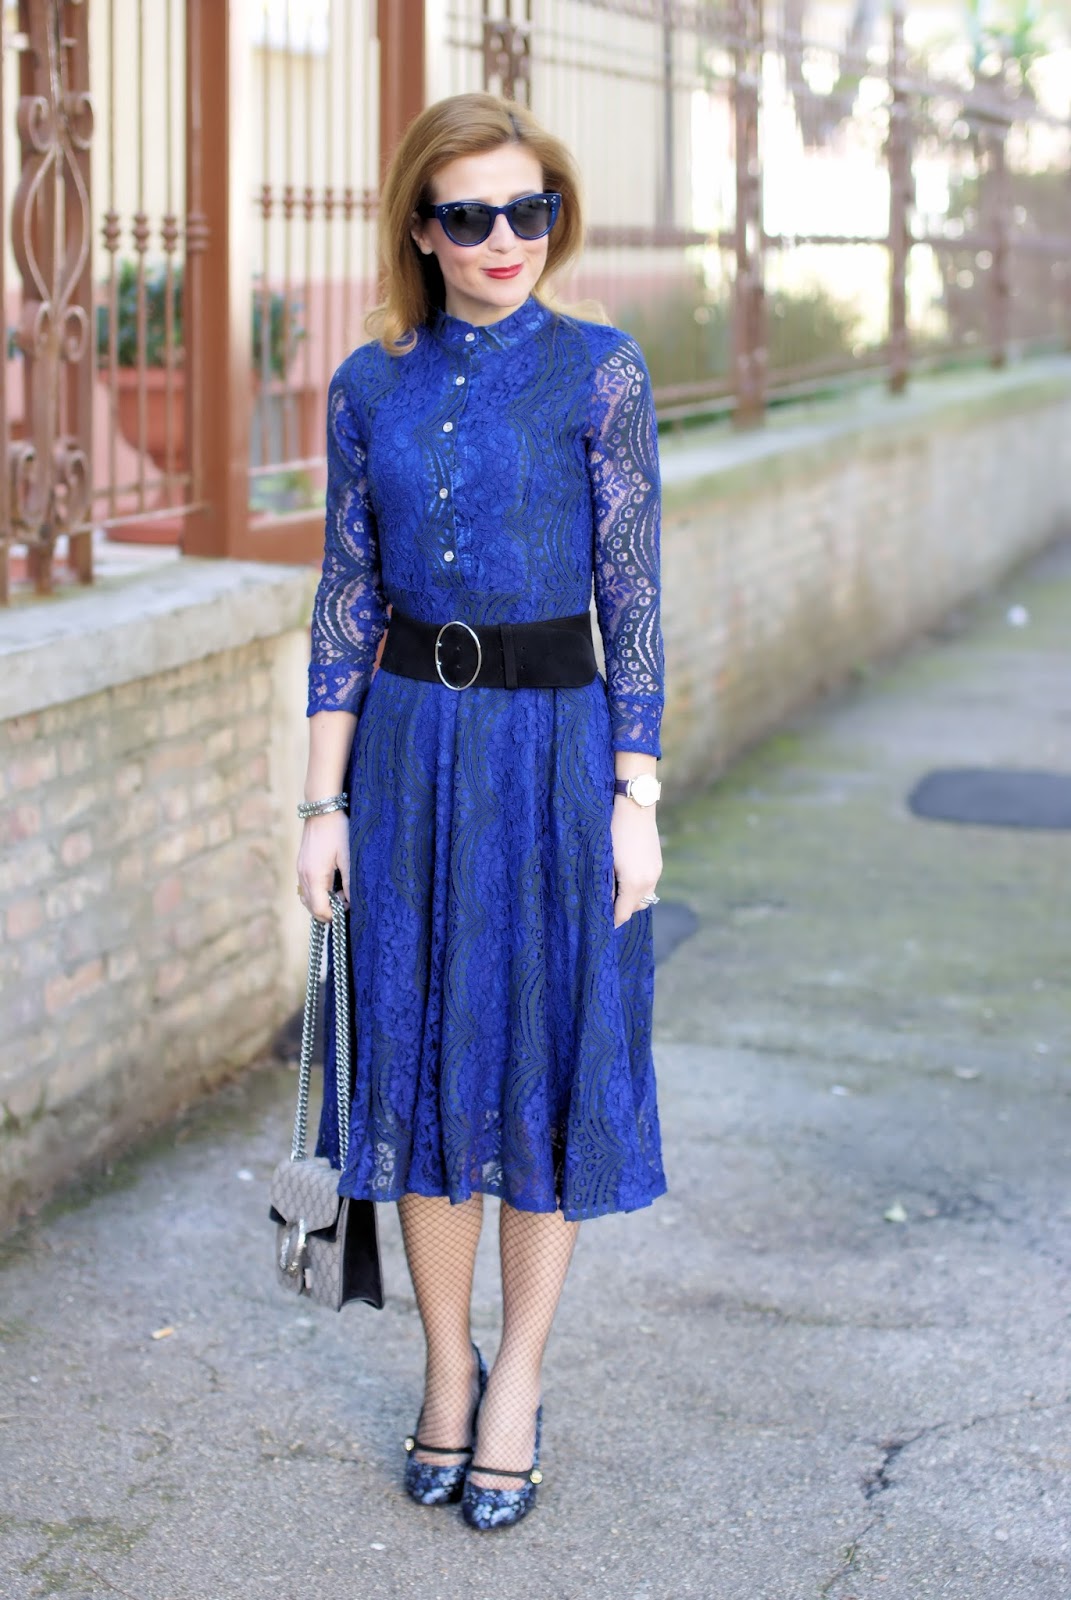 What to wear on Easter: my outfit idea with a blue lace dress and fishnets on Fashion and Cookies fashion blog, fashion blogger style